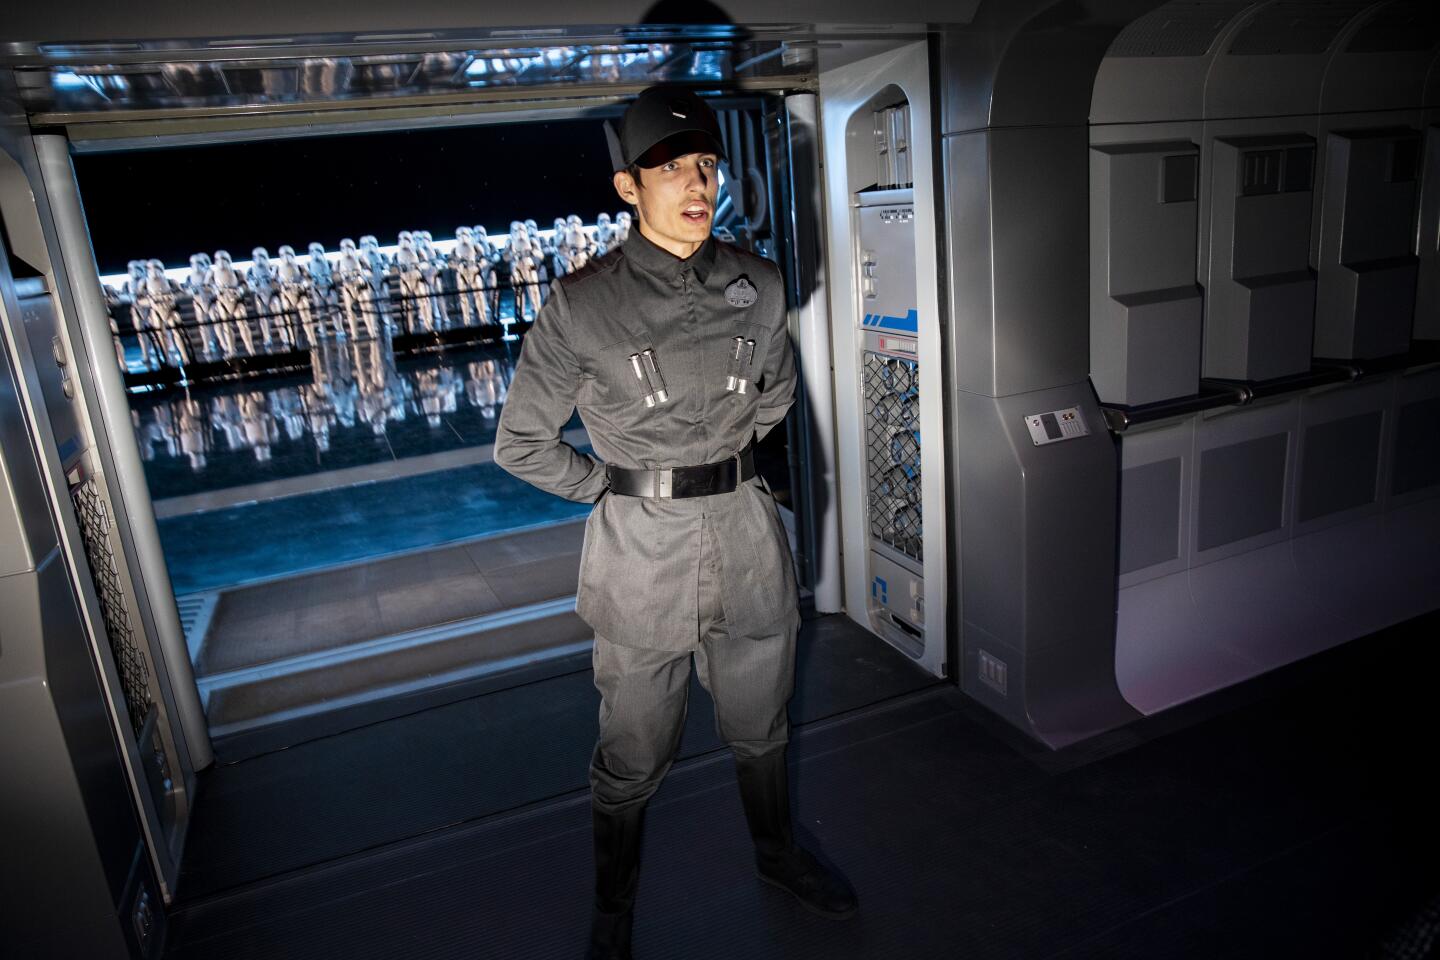 ORLANDO, FL --DECEMBER 03, 2019—A Disney Cast Member dressed as a member of the First Order leads guests into a hangar bay of a Star Destroyer, where 50 Stormtroopers greet riders, on Star Wars: Rise of the Resistance, during a press preview at Star Wars: Galaxy’s Edge at Disney’s Hollywood Studios, in Orlando, FL, Dec 03, 2019. The ride, opening this week in Florida and in mid-January in Anaheim, is billed as Disney's most ambitious ride ever and the key to ushering in the crowds to Galaxy's Edge.(Jay L. Clendenin / Los Angeles Times)